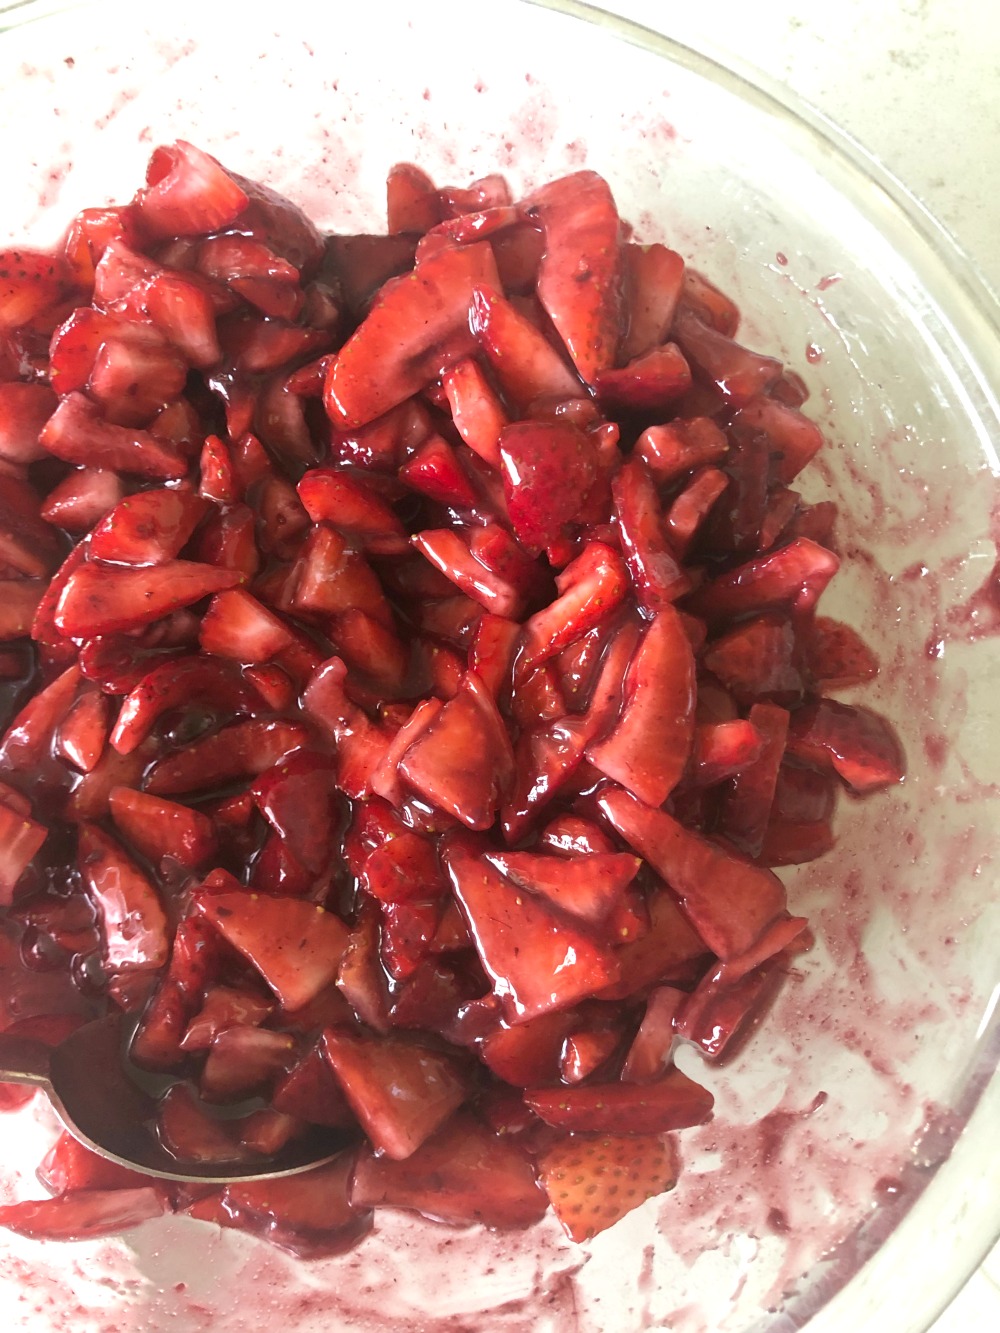 Strawberry mixture in a glass mixing bowl